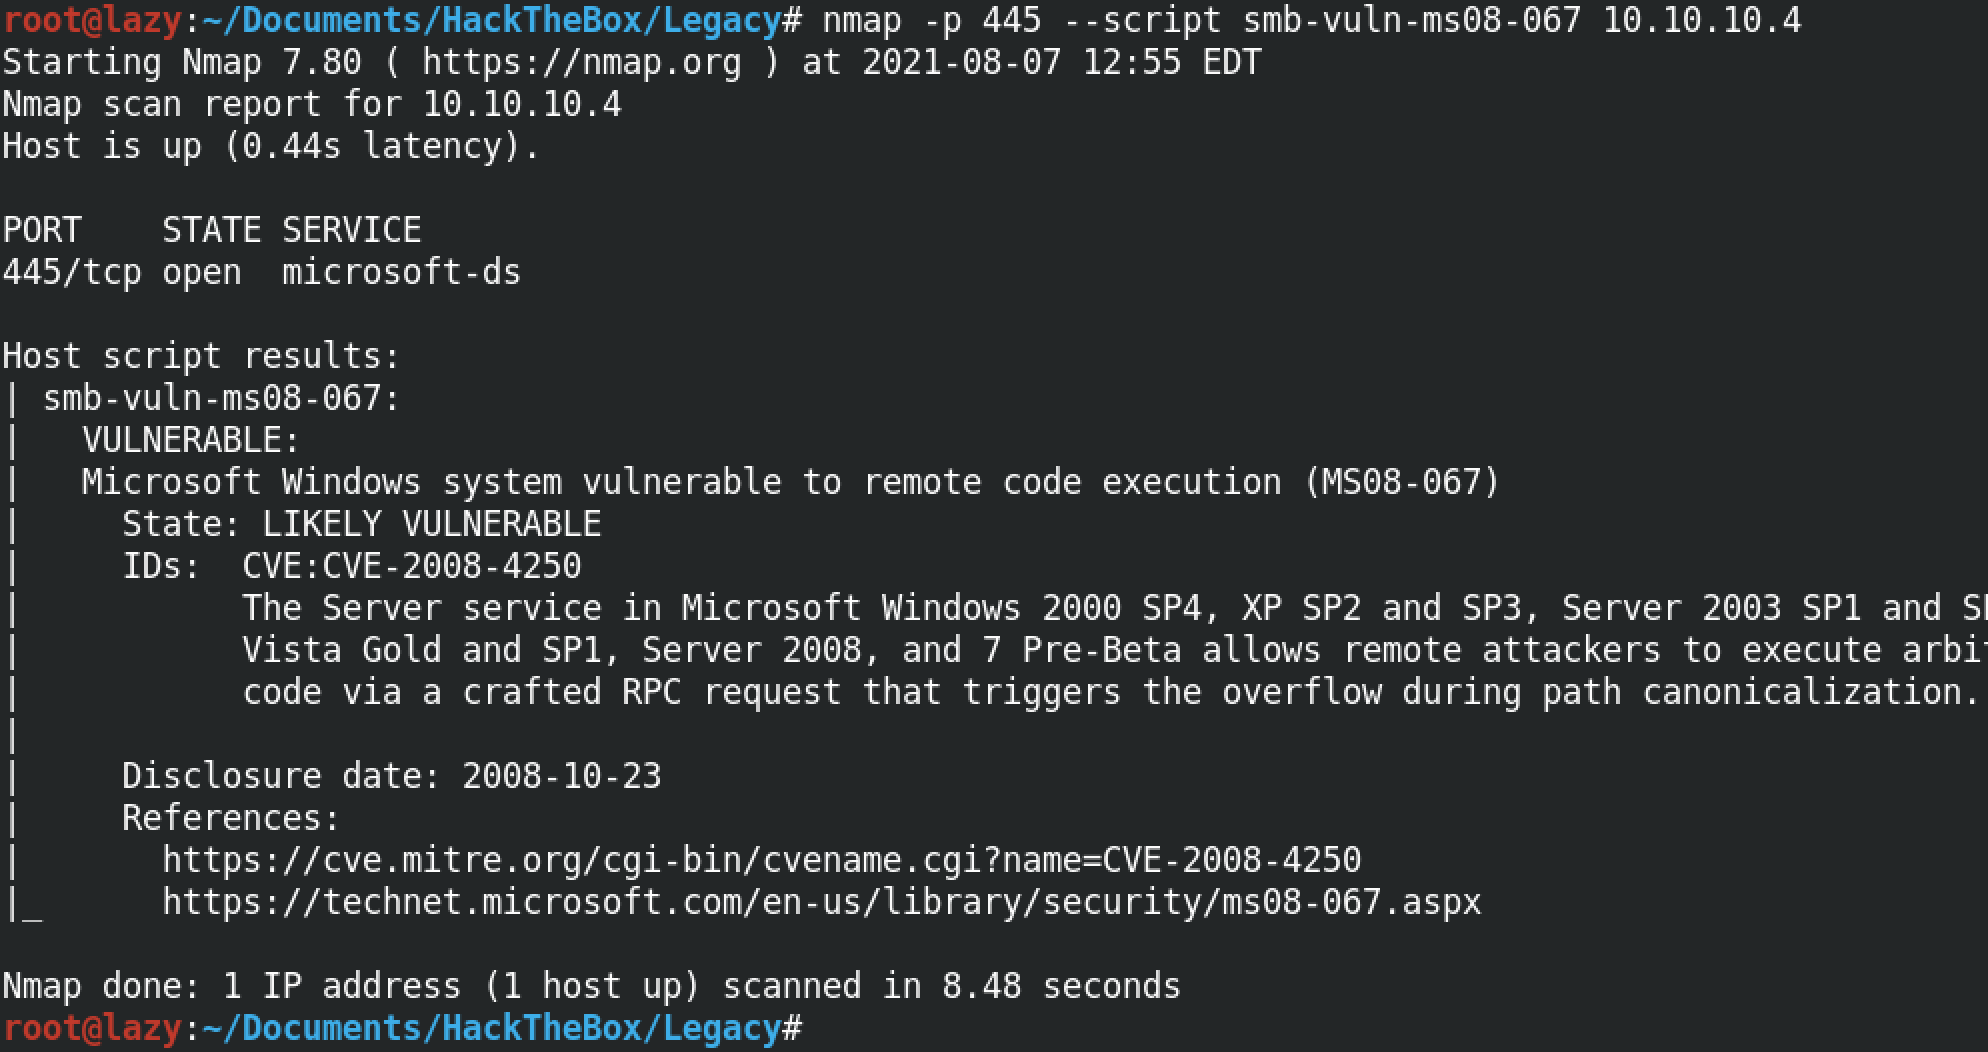 Nmap scan to find ms08-067 vulnerability.